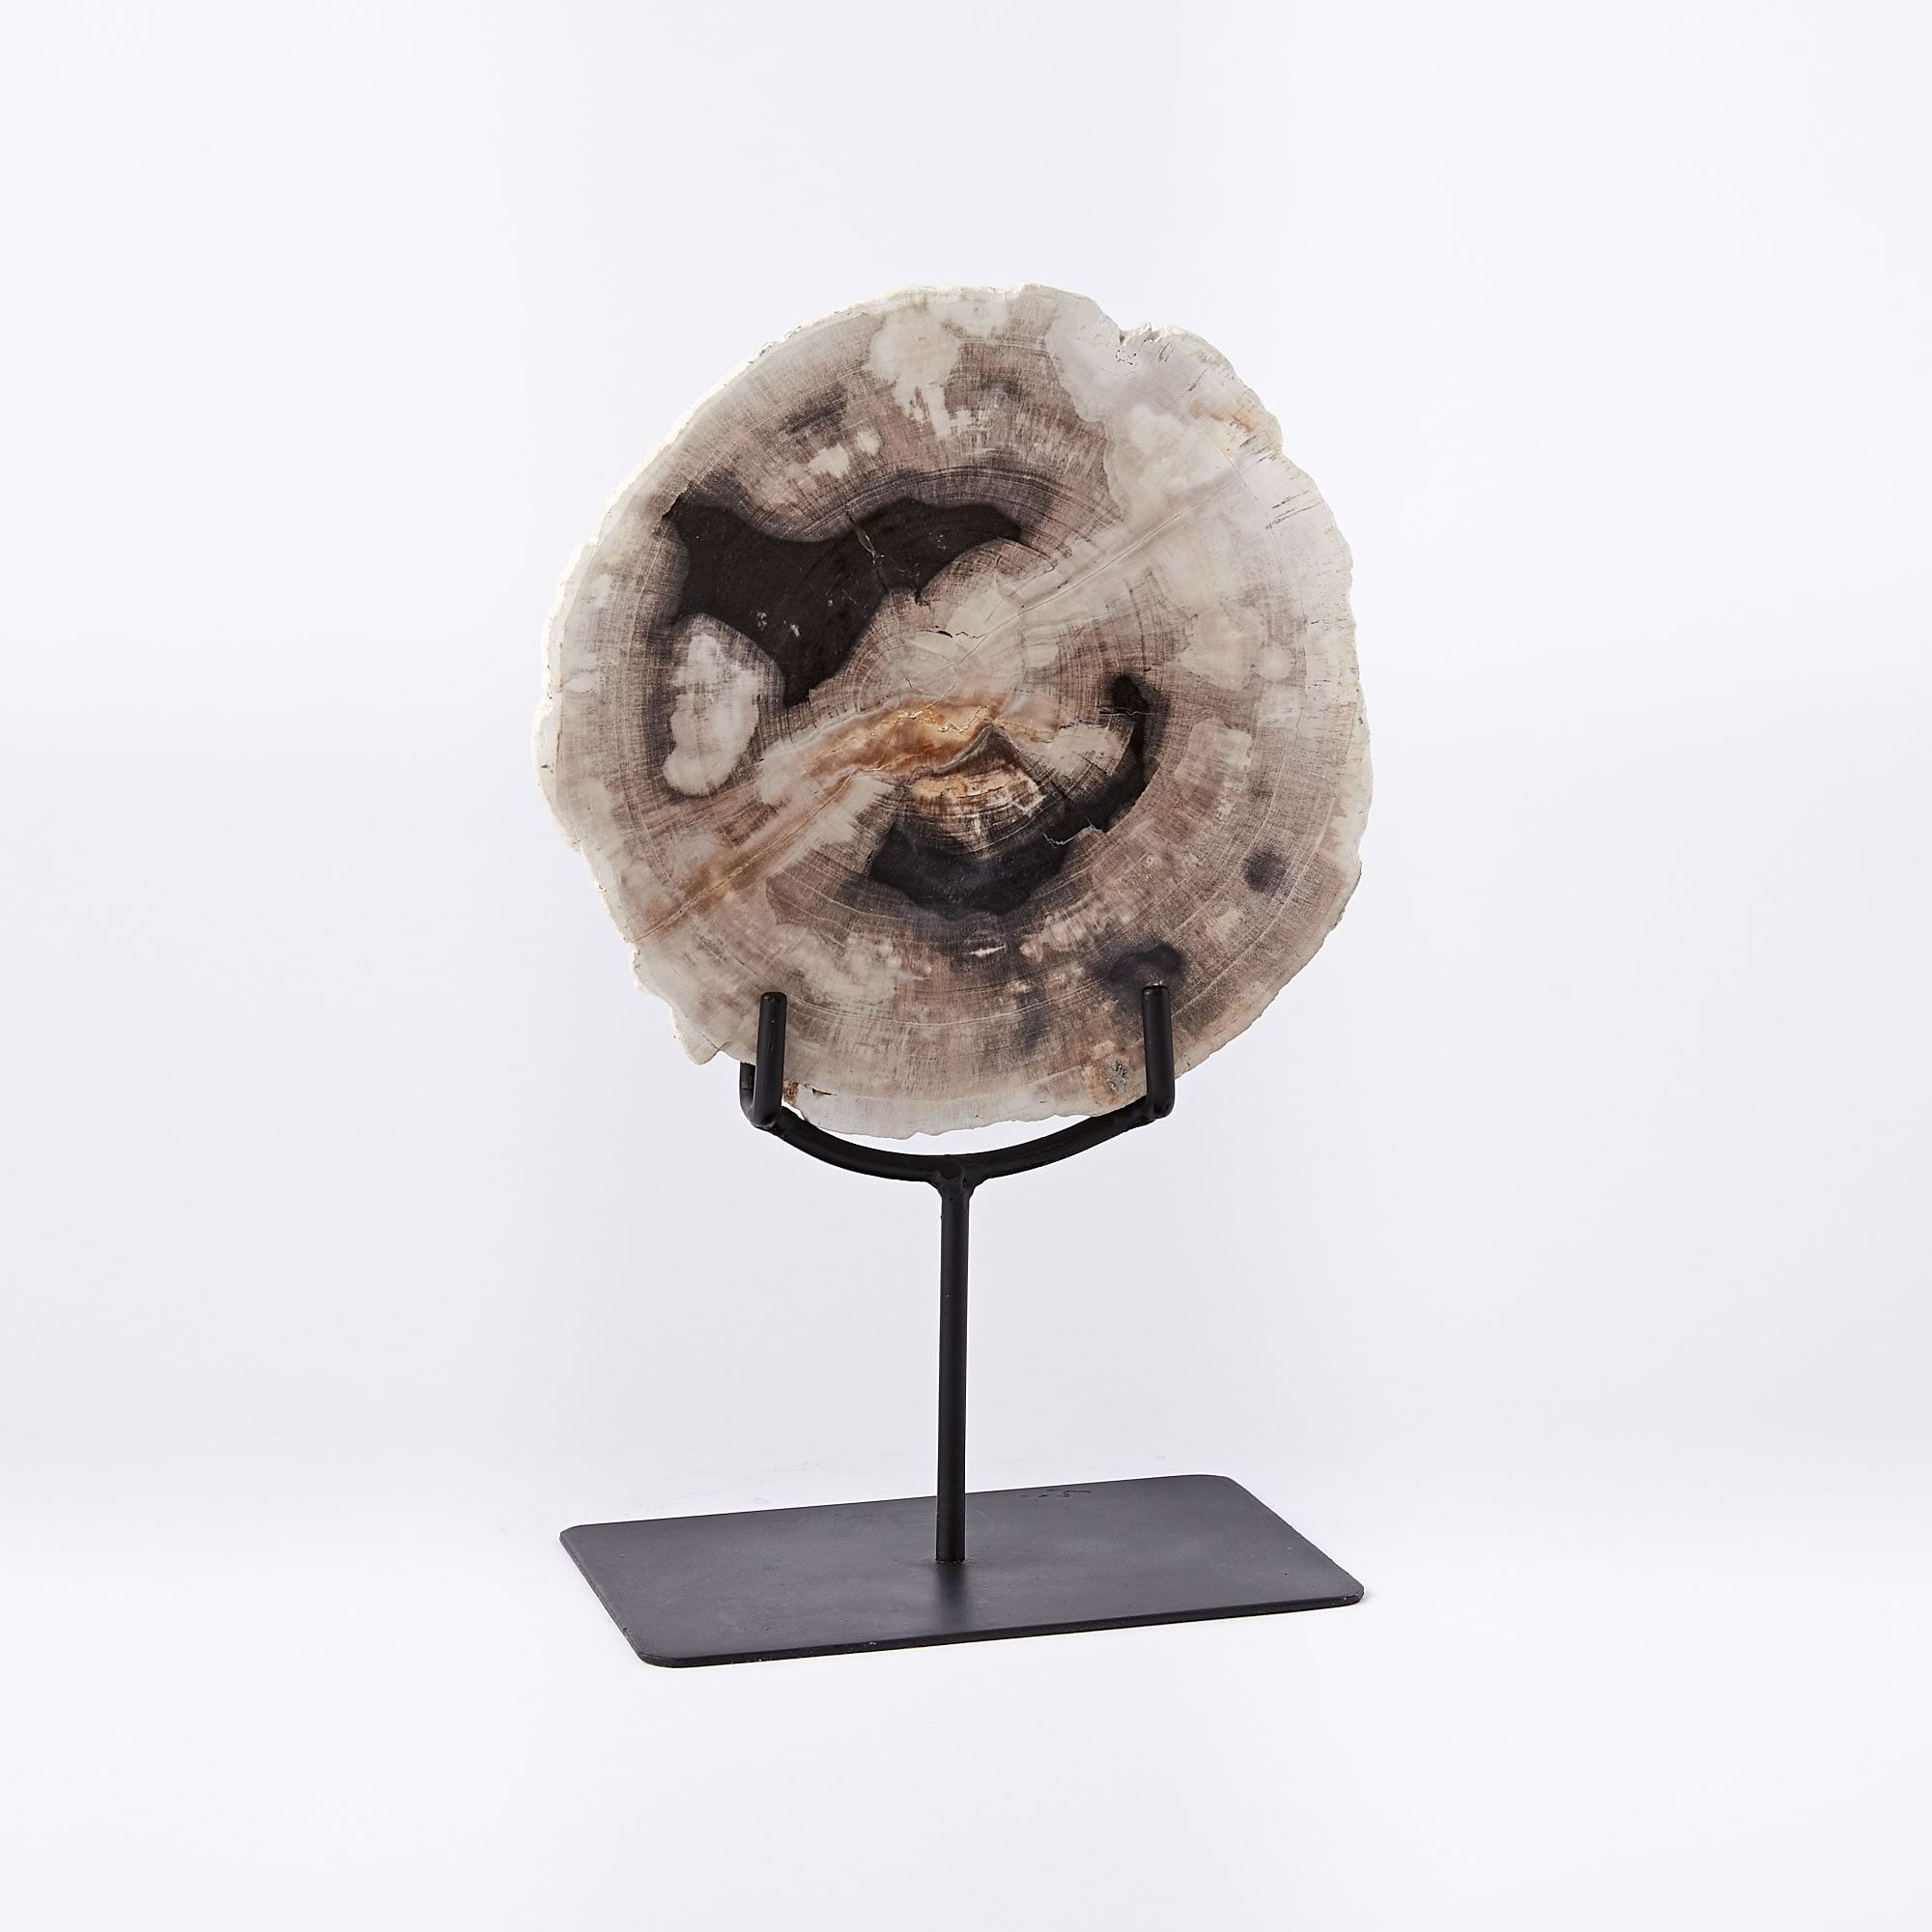 Petrified Wood Object on Stand, Decorative Accents | West Elm